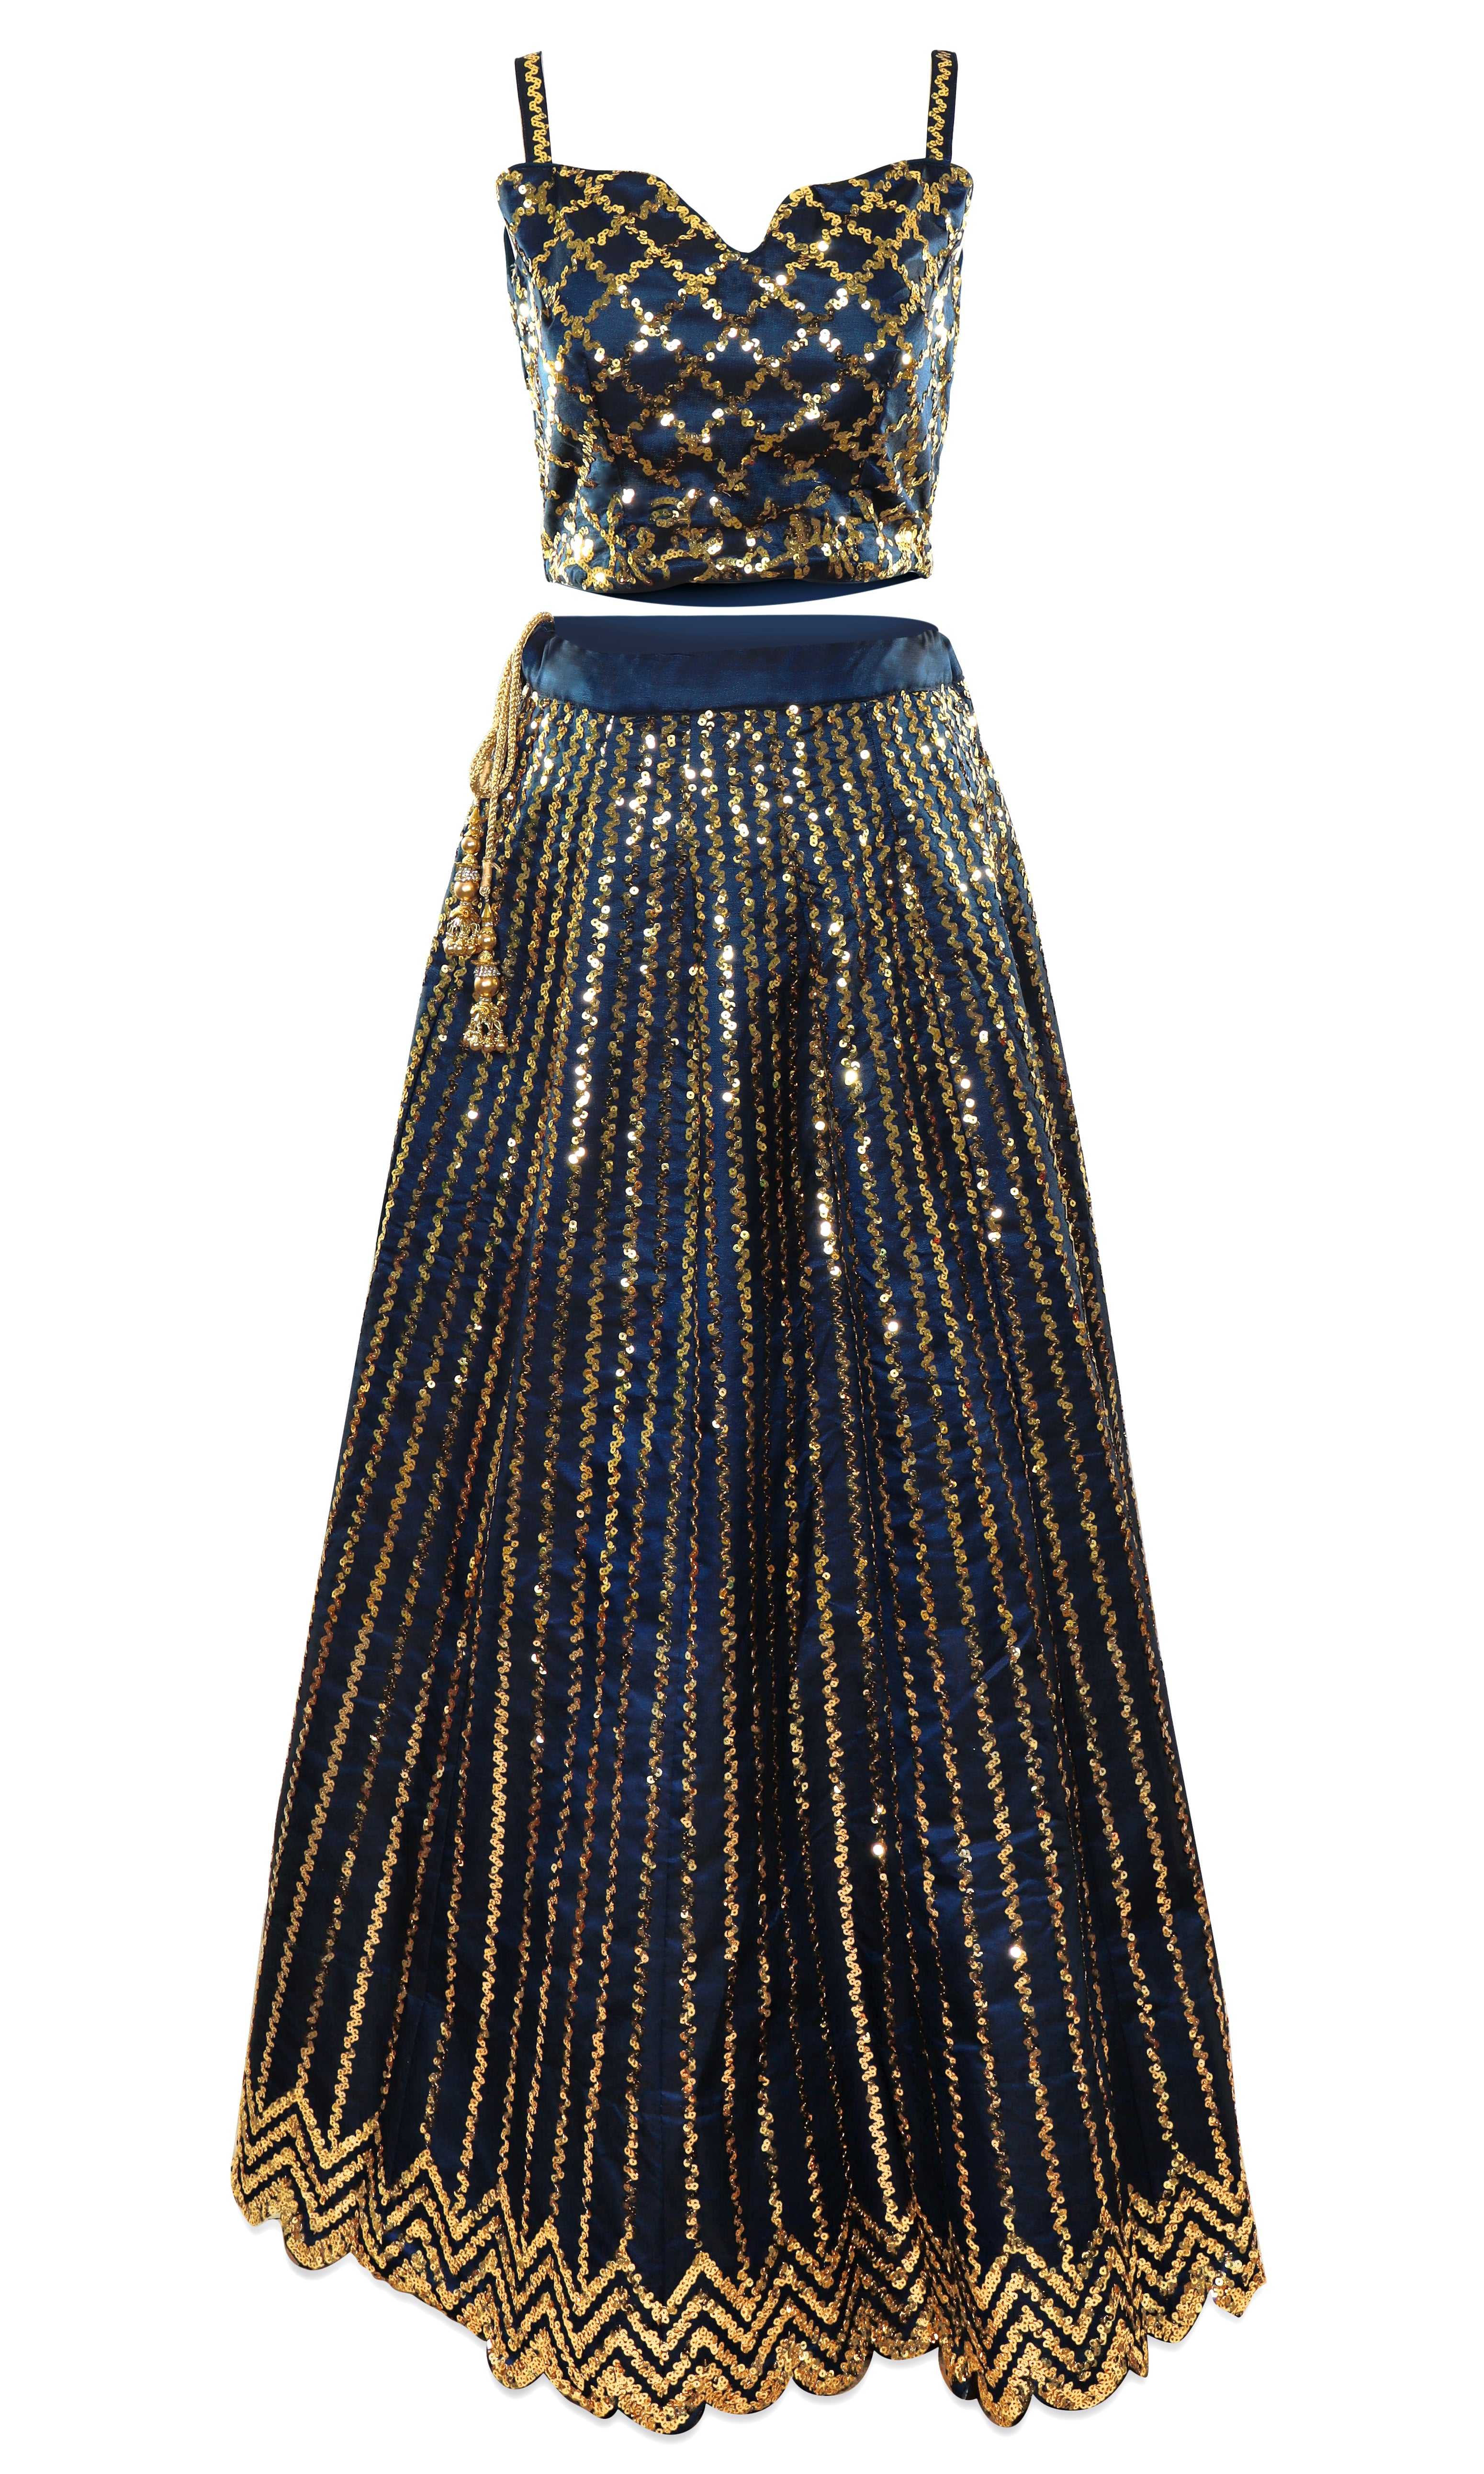 Blue gold lehenga is navy in color covered in gold sequins with pair adjustable blouse in the back.